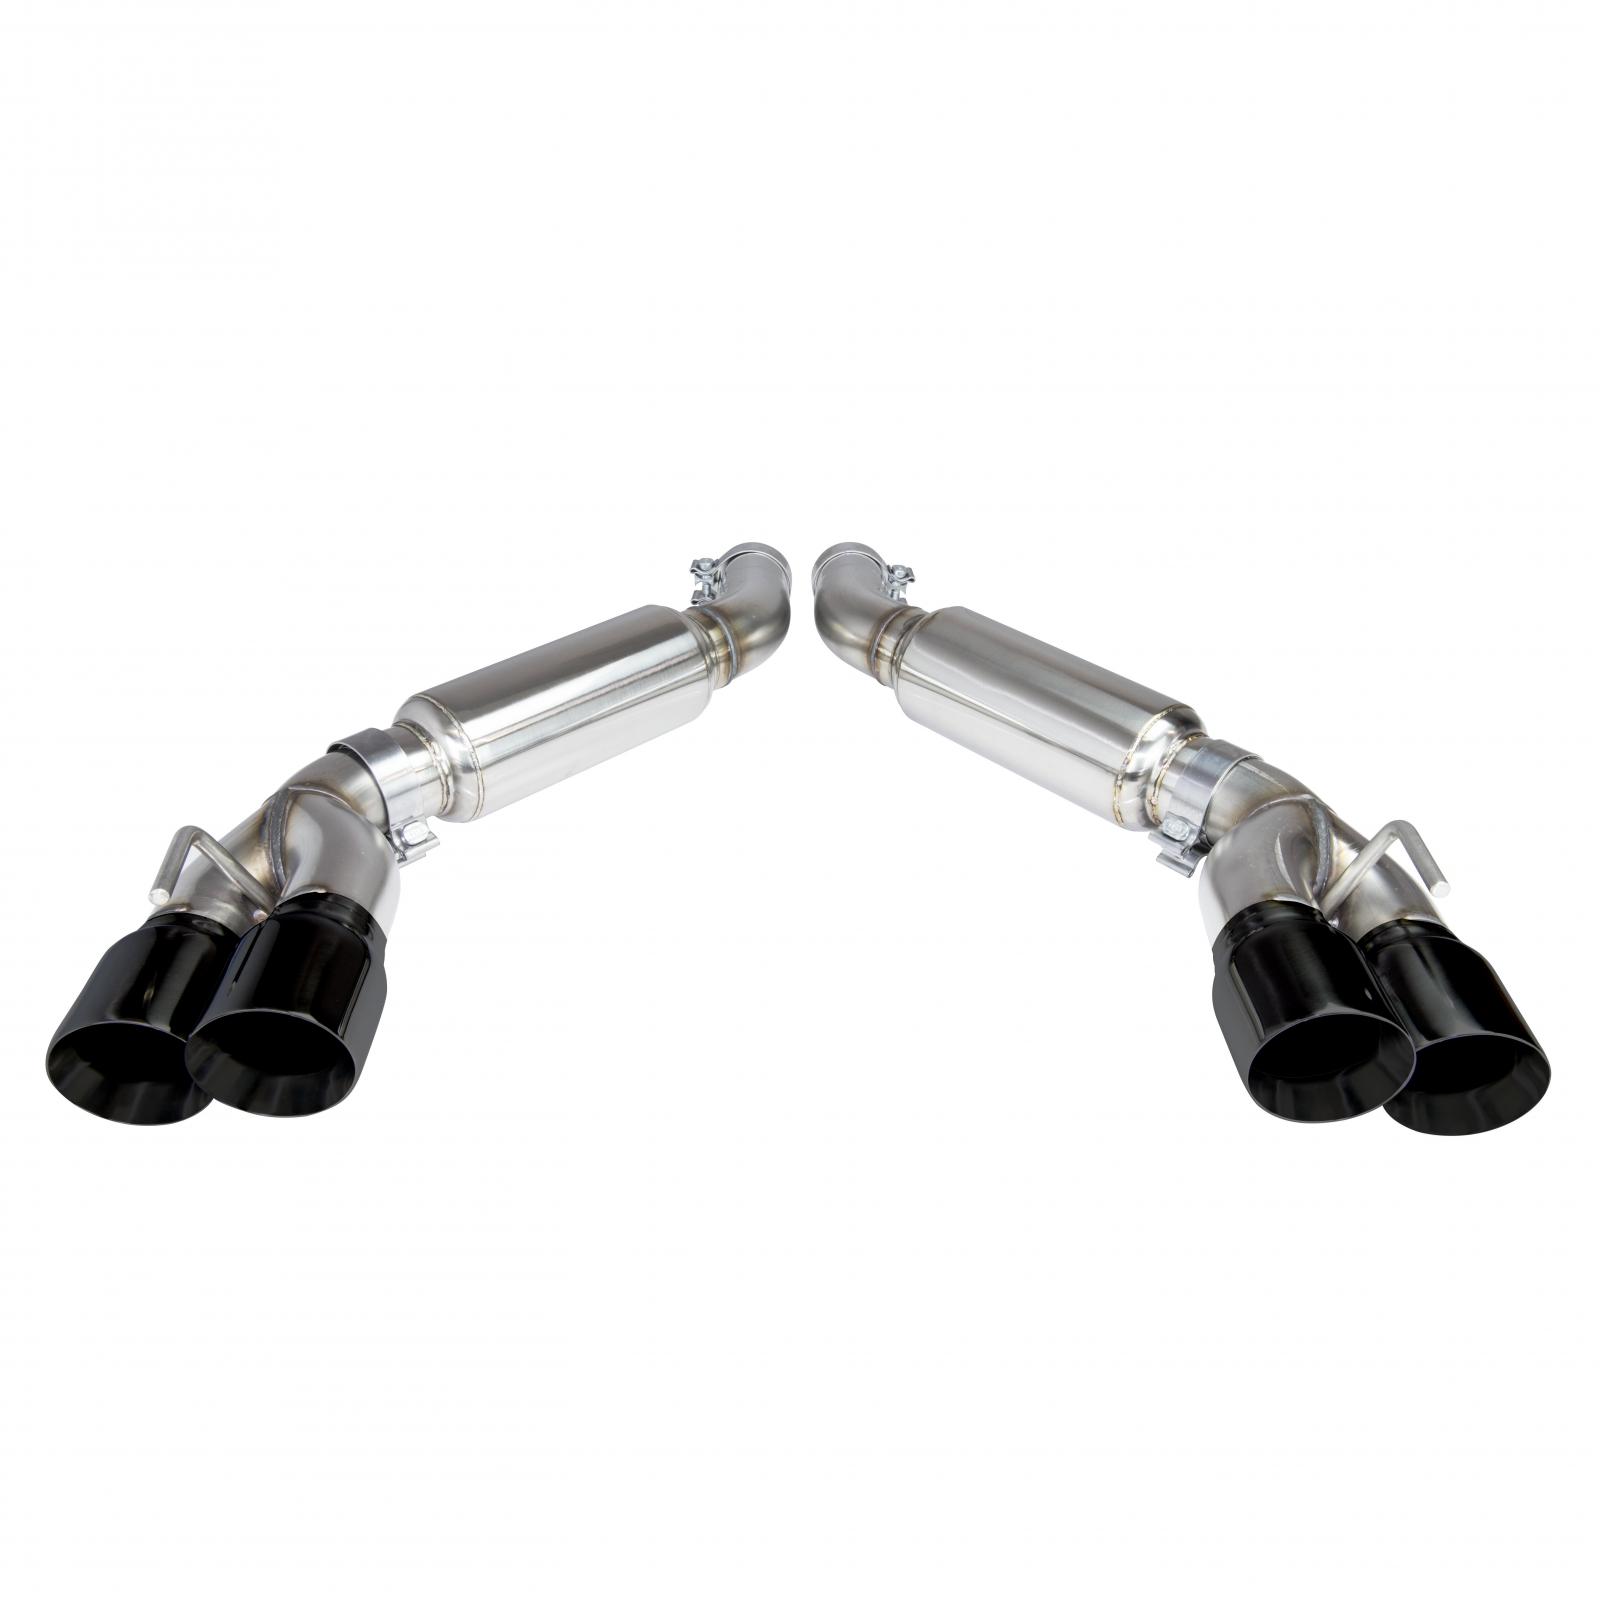 Axle Back Exhaust System 3" 16-Pres Chevrolet Camaro Kooks Mufflers Quad Tips Factory Exhaust